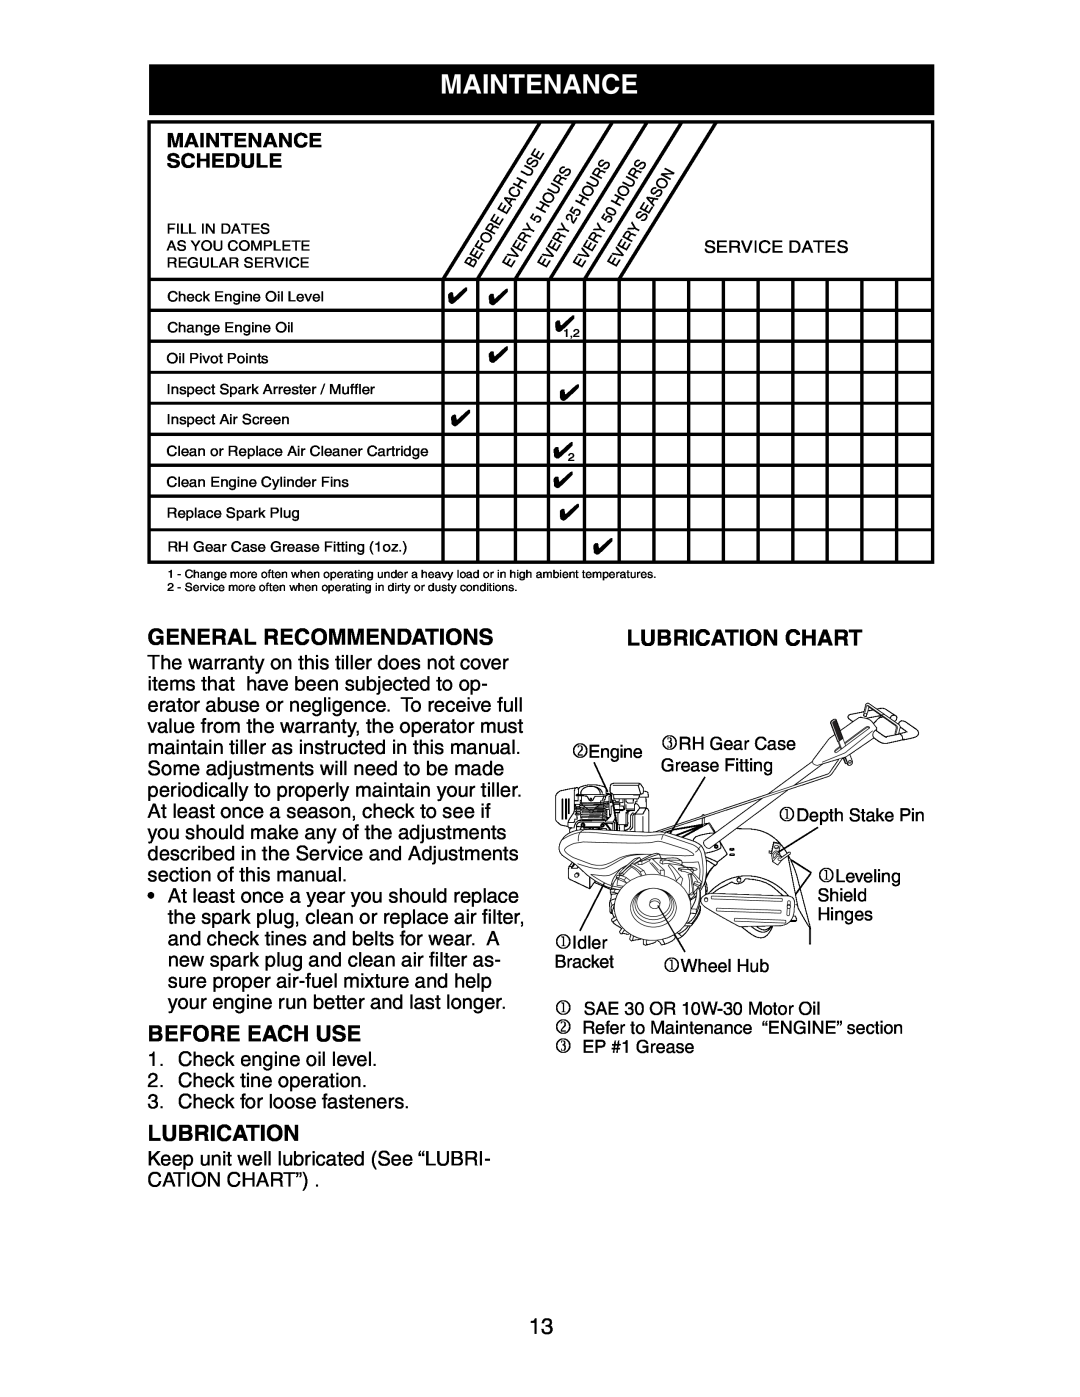 Sears 917.29425 owner manual General Recommendations, Before Each Use, Lubrication Chart, Maintenance Schedule 